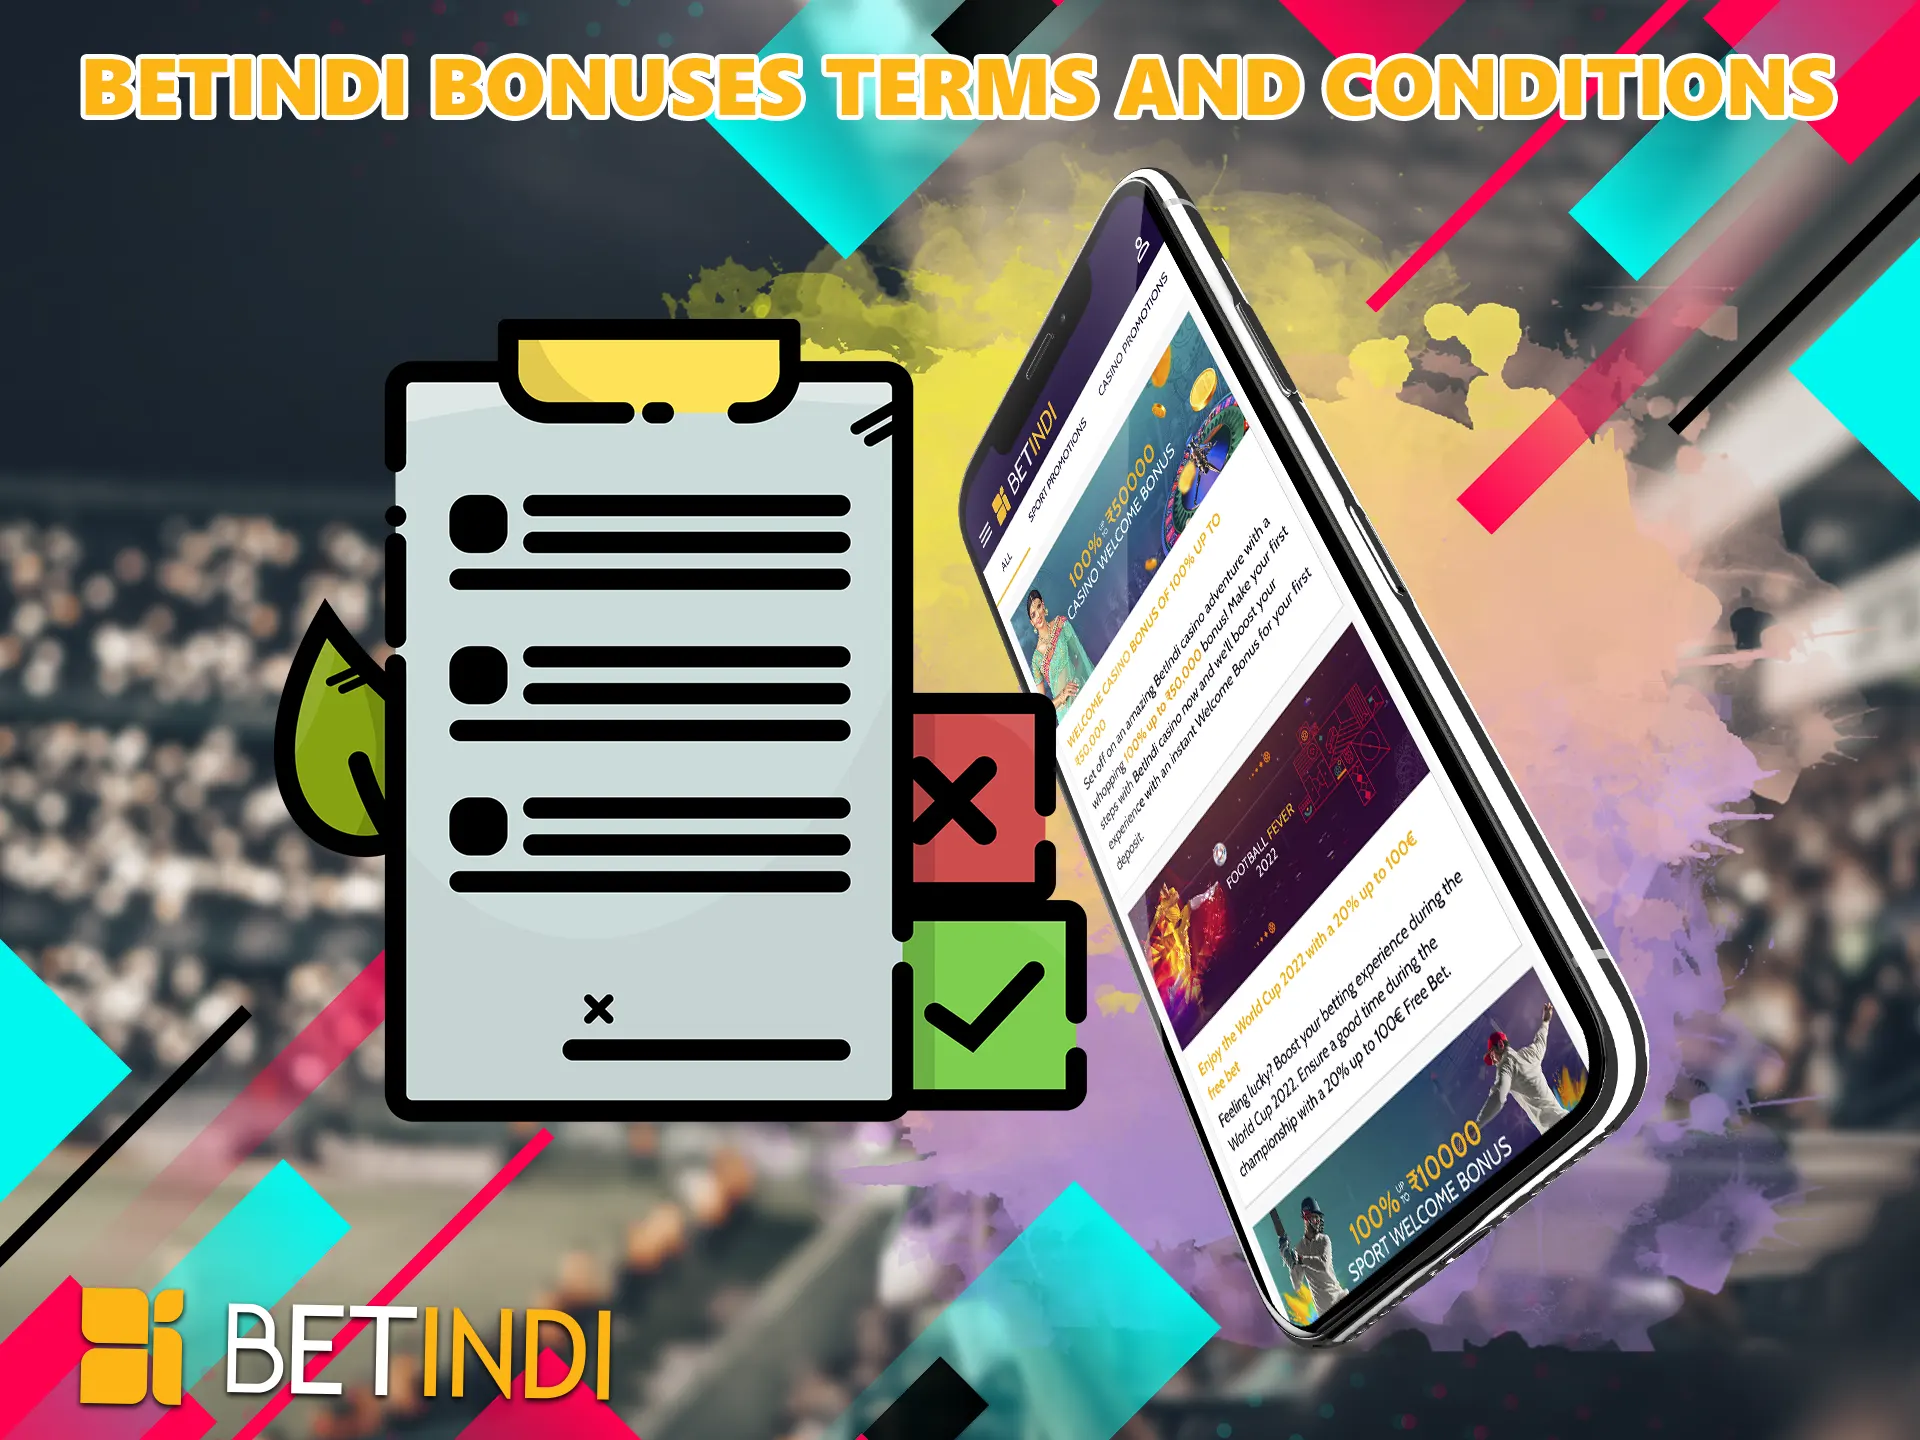 Anyone is eligible to receive BetIndi bonuses, they just need to meet the basic terms and conditions of the BetIndi bookmaker.